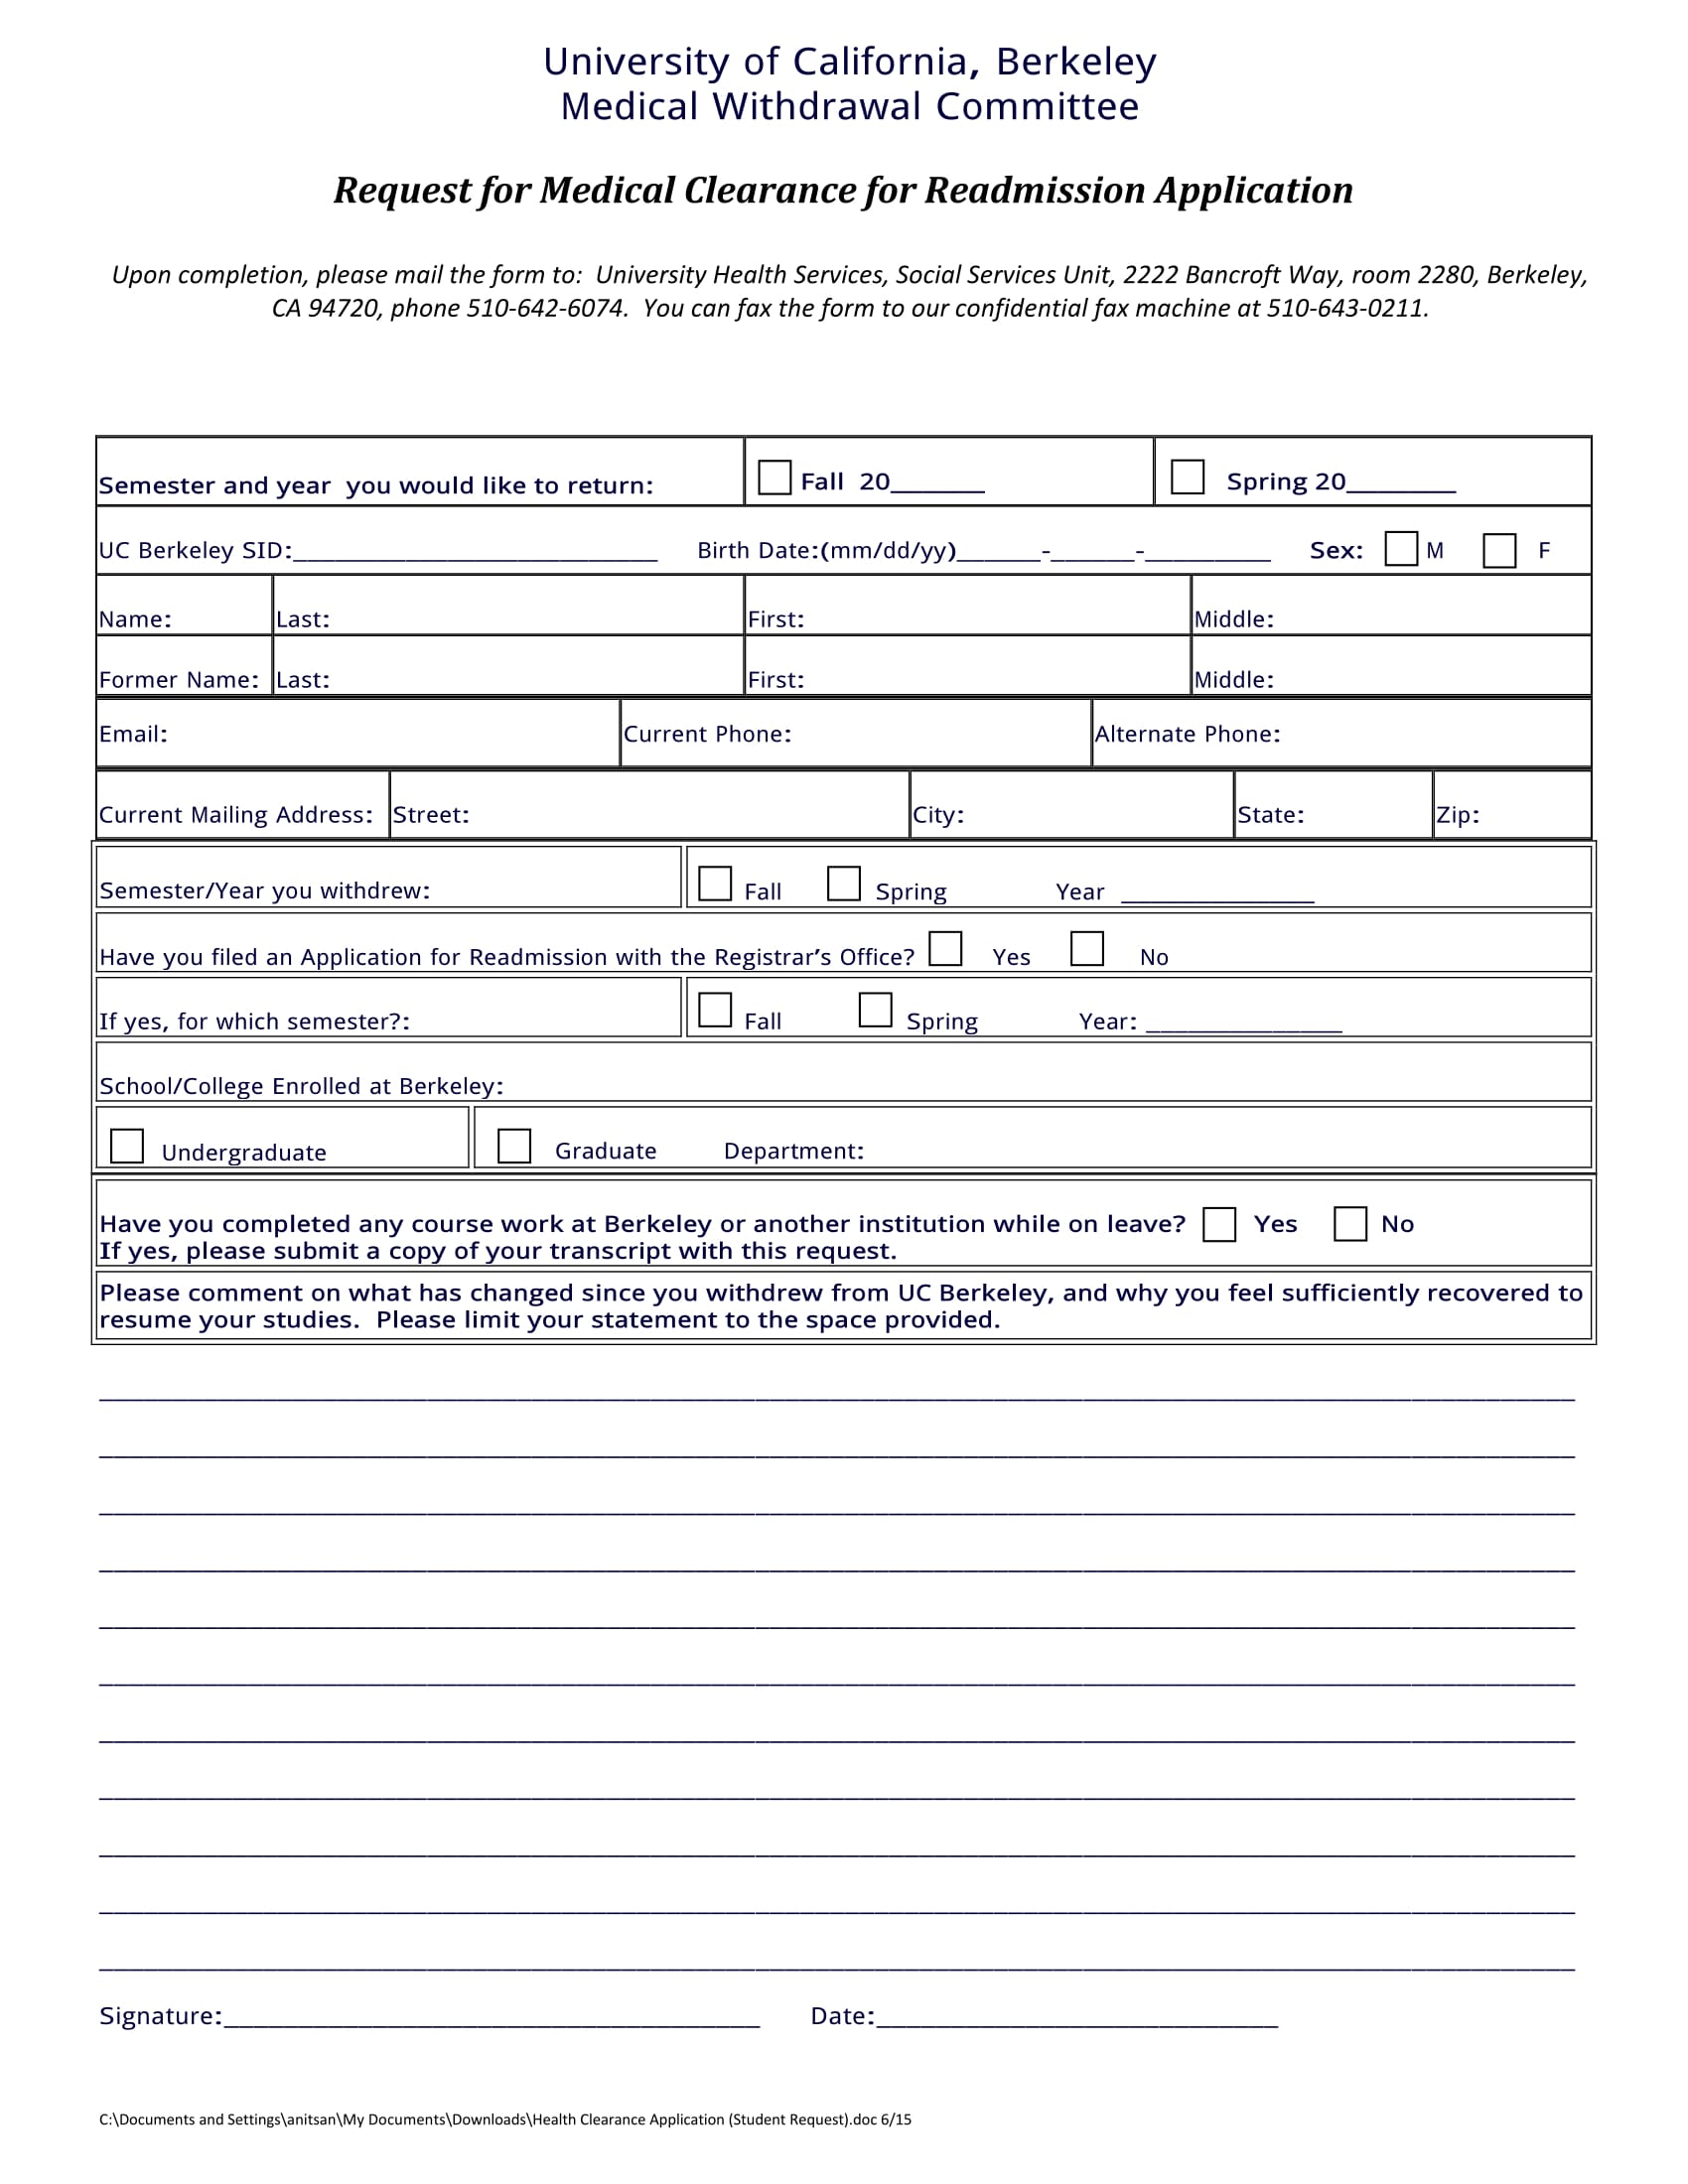 readmission application medical clearance form 1